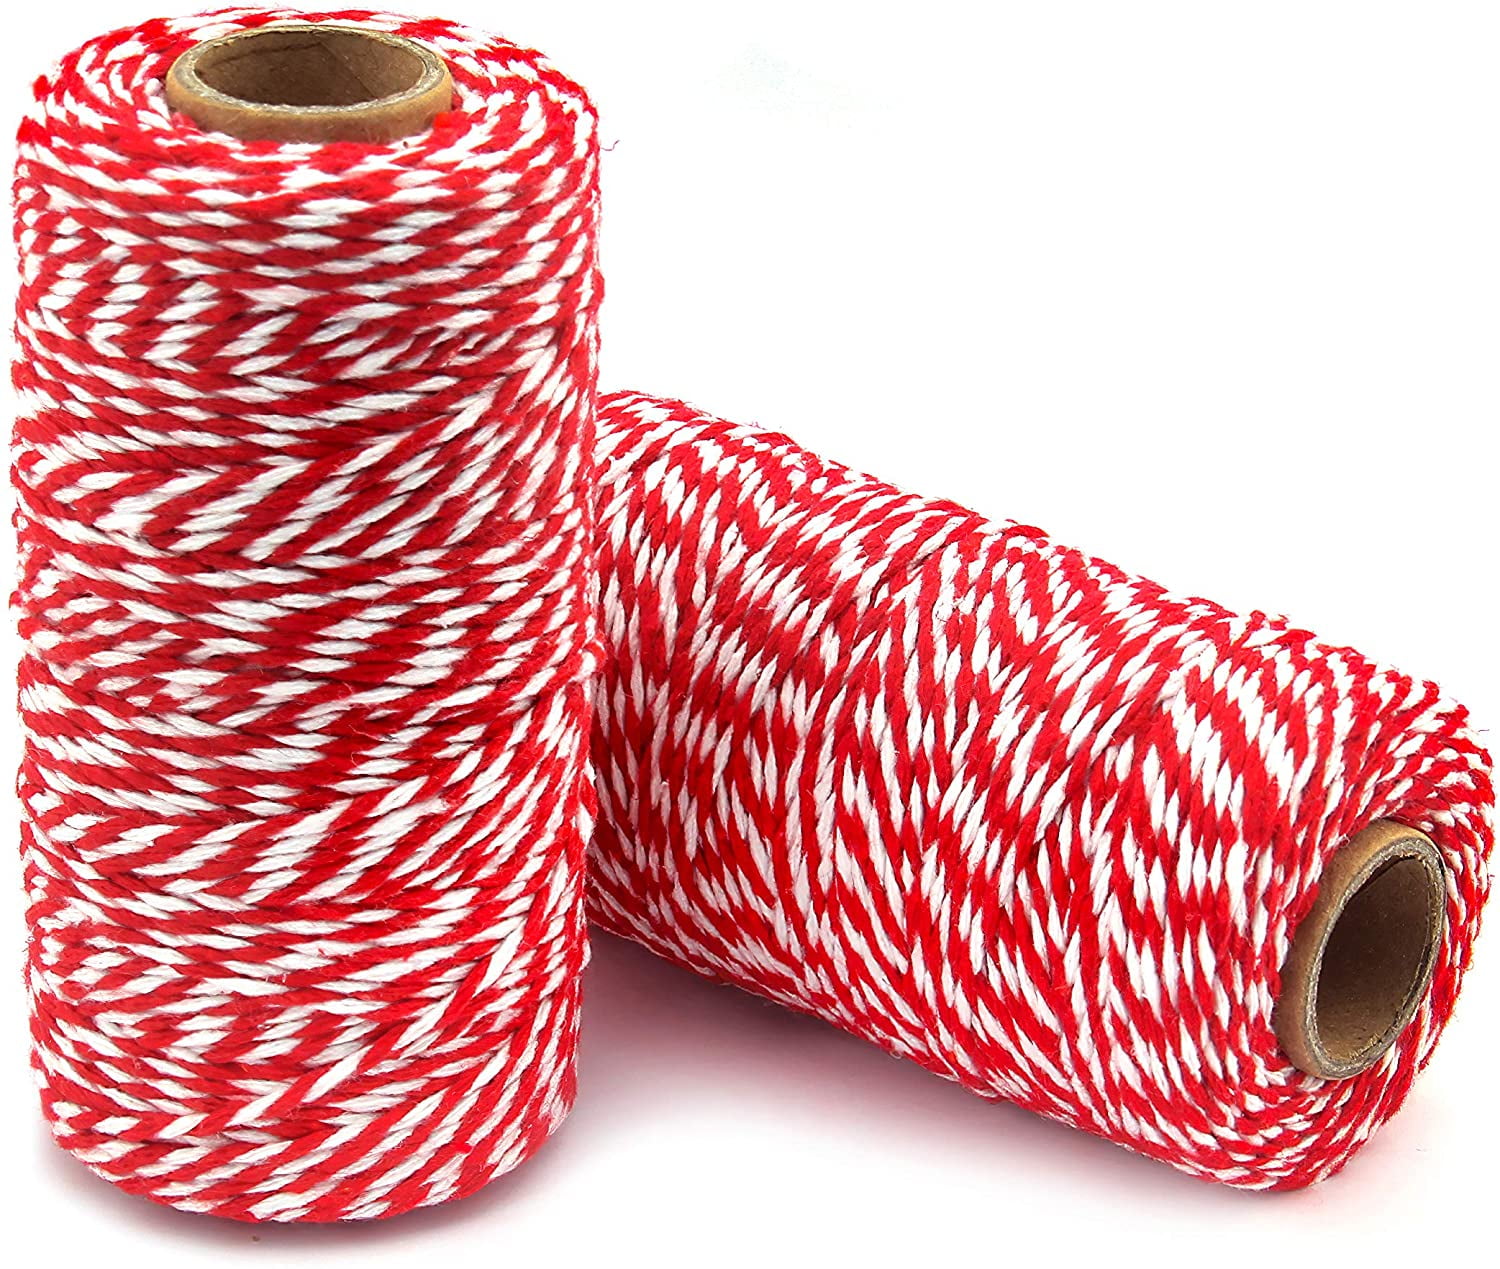 Buy One Get One Free! Red White & Green 100 Metres Craft Giftwrap Twine/String 